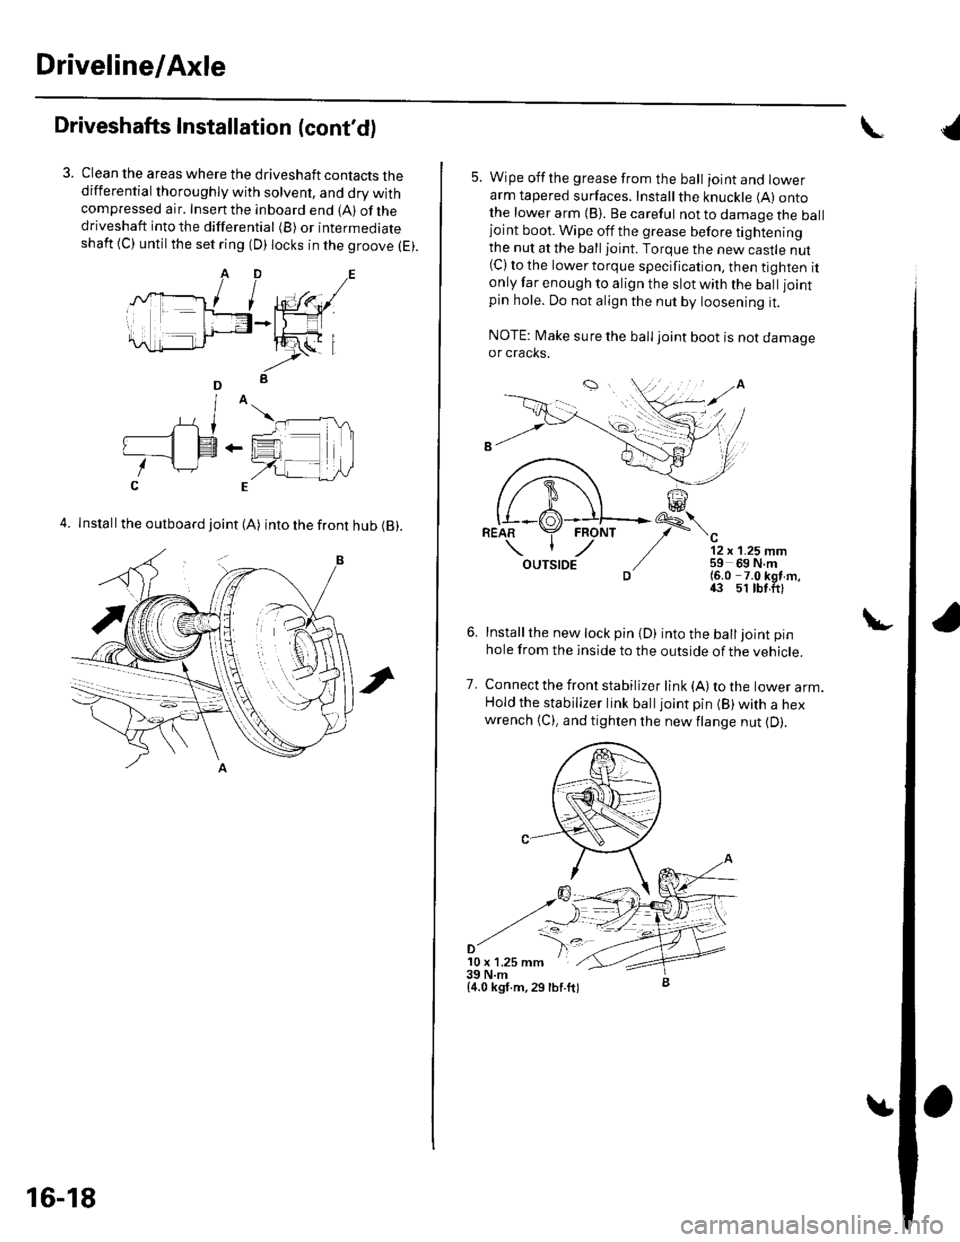 HONDA CIVIC 2003 7.G Workshop Manual Driveline/Axle
Driveshafts Installation (contd)
Clean the areas where the driveshaft contacts thedifferential thoroughly with solvent, and dry withcompressed air. Insenthe inboard end {A) ofthedrives